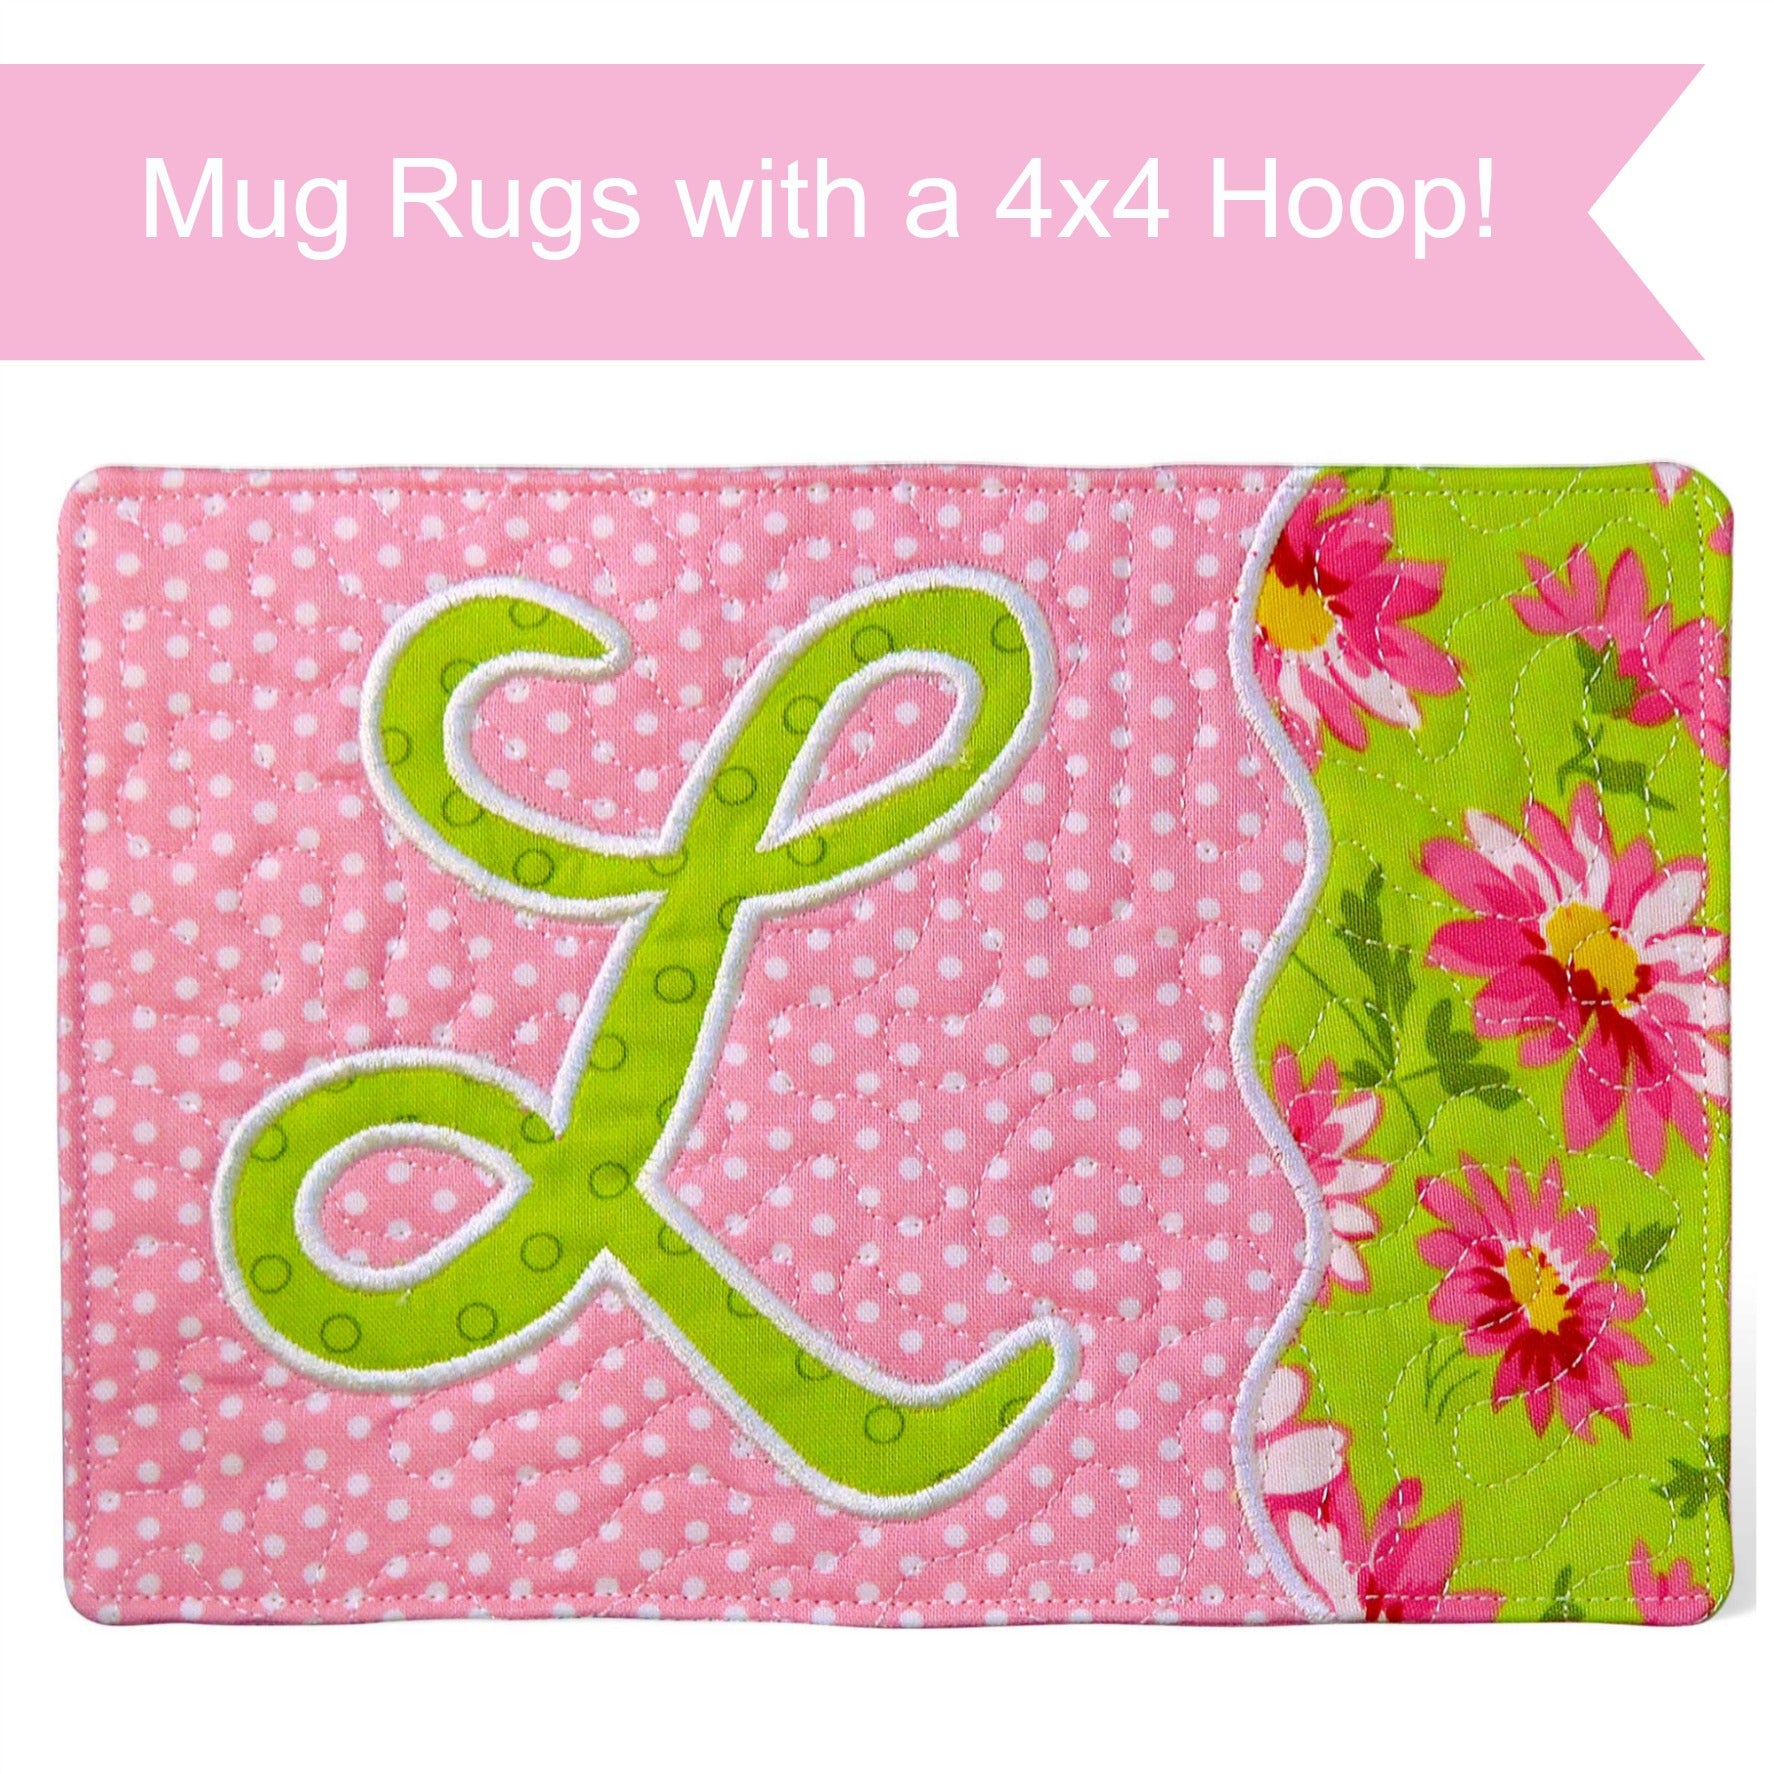 Monogrammed mug rugs sewing and embroidery pattern